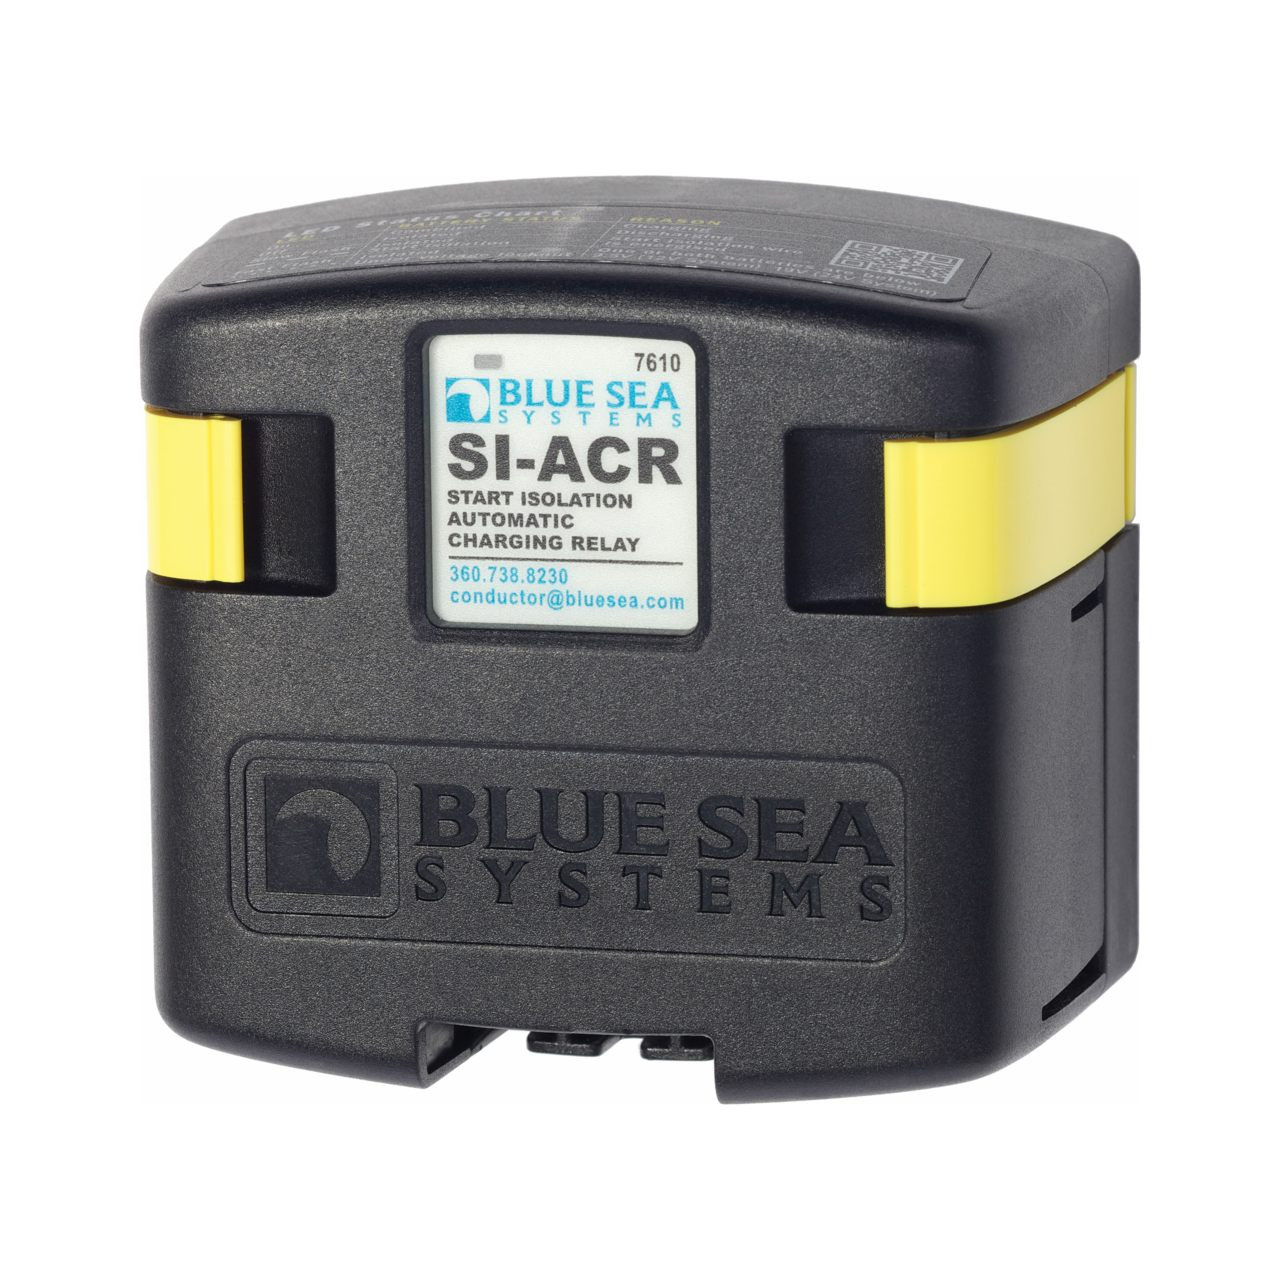 Blue Sea Systems Battery Charging Relay, from parts4engines.com